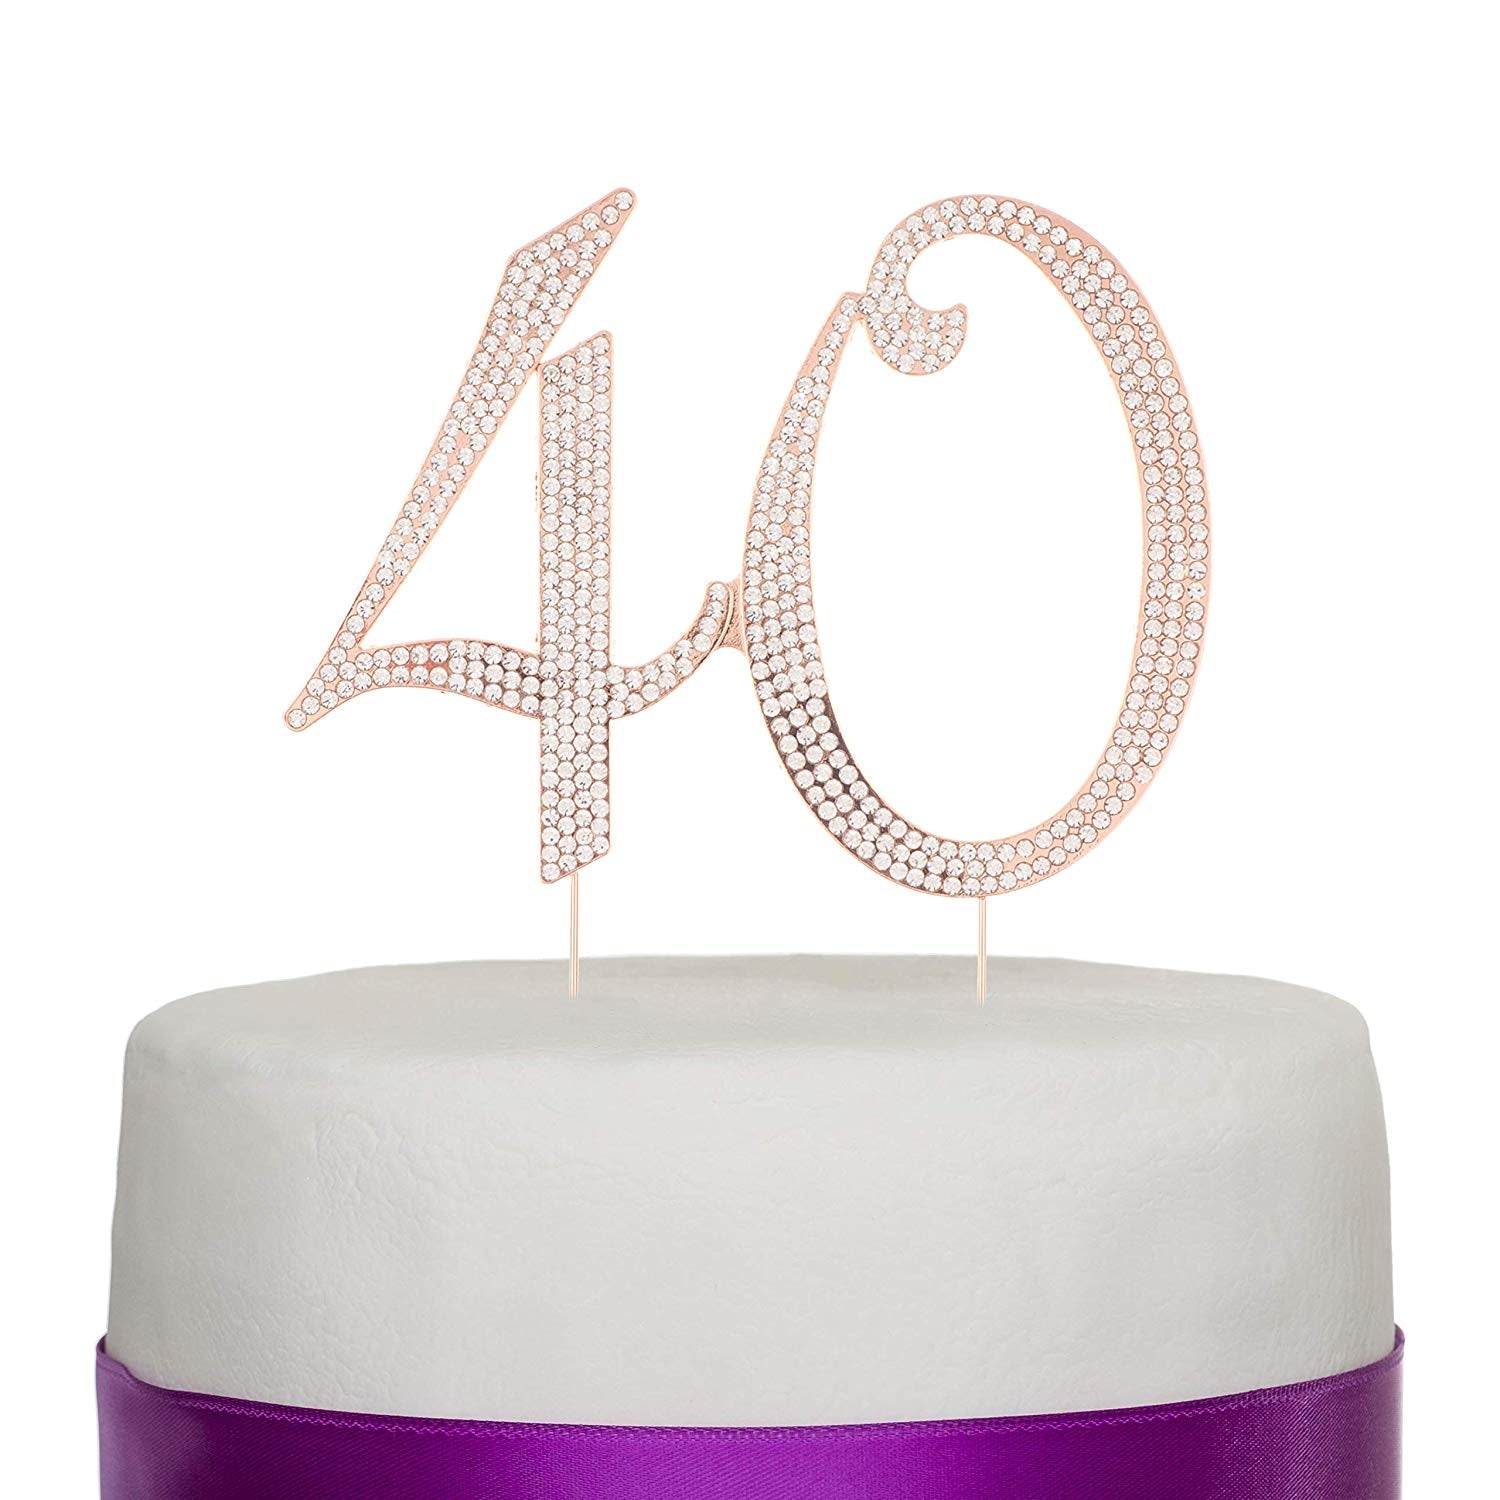 CAKE TOPPERS • –